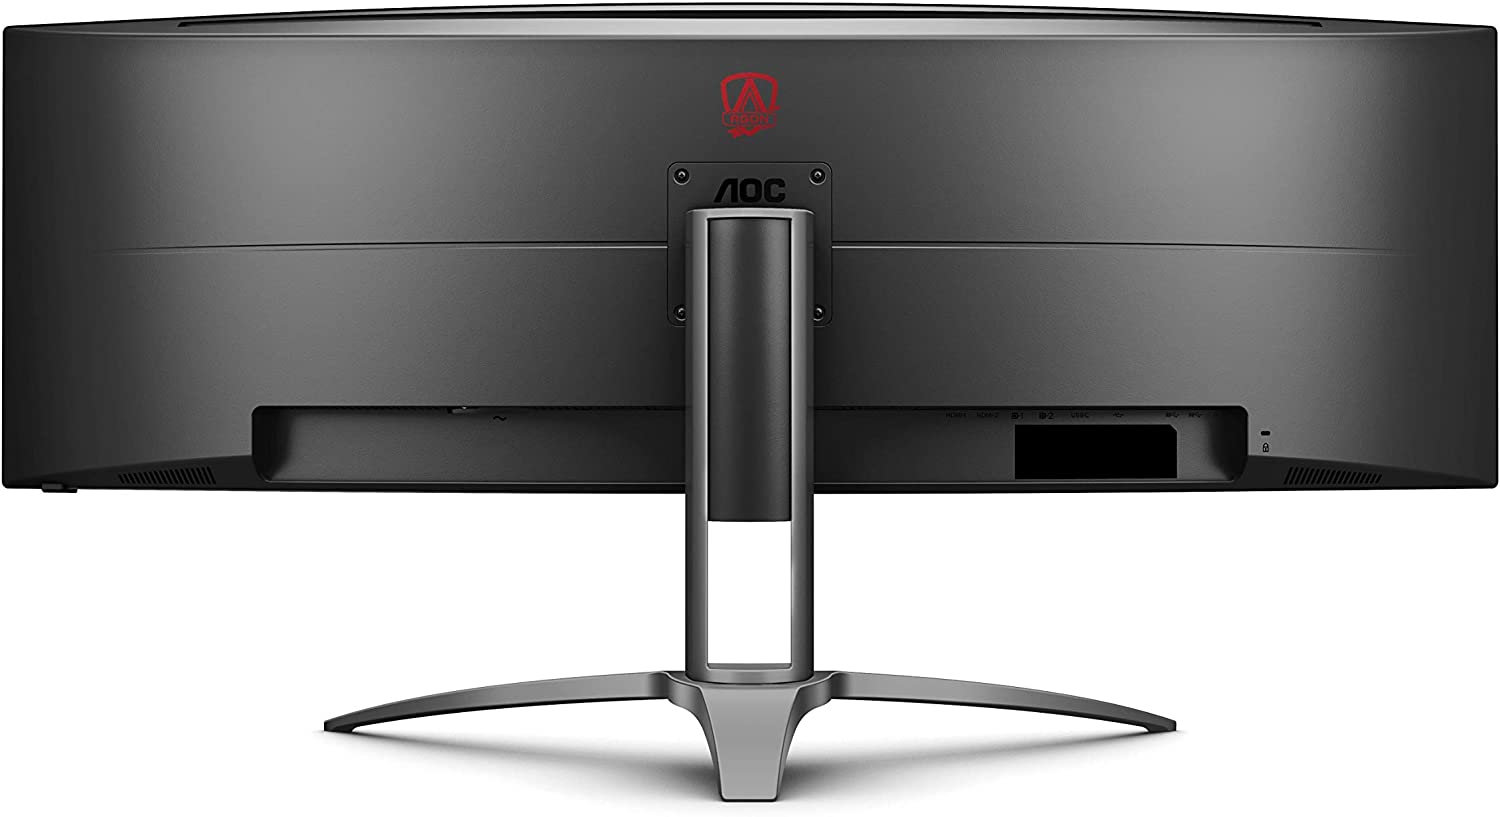 AOC Agon AG493UCX monitor is presented: specs, price and release date